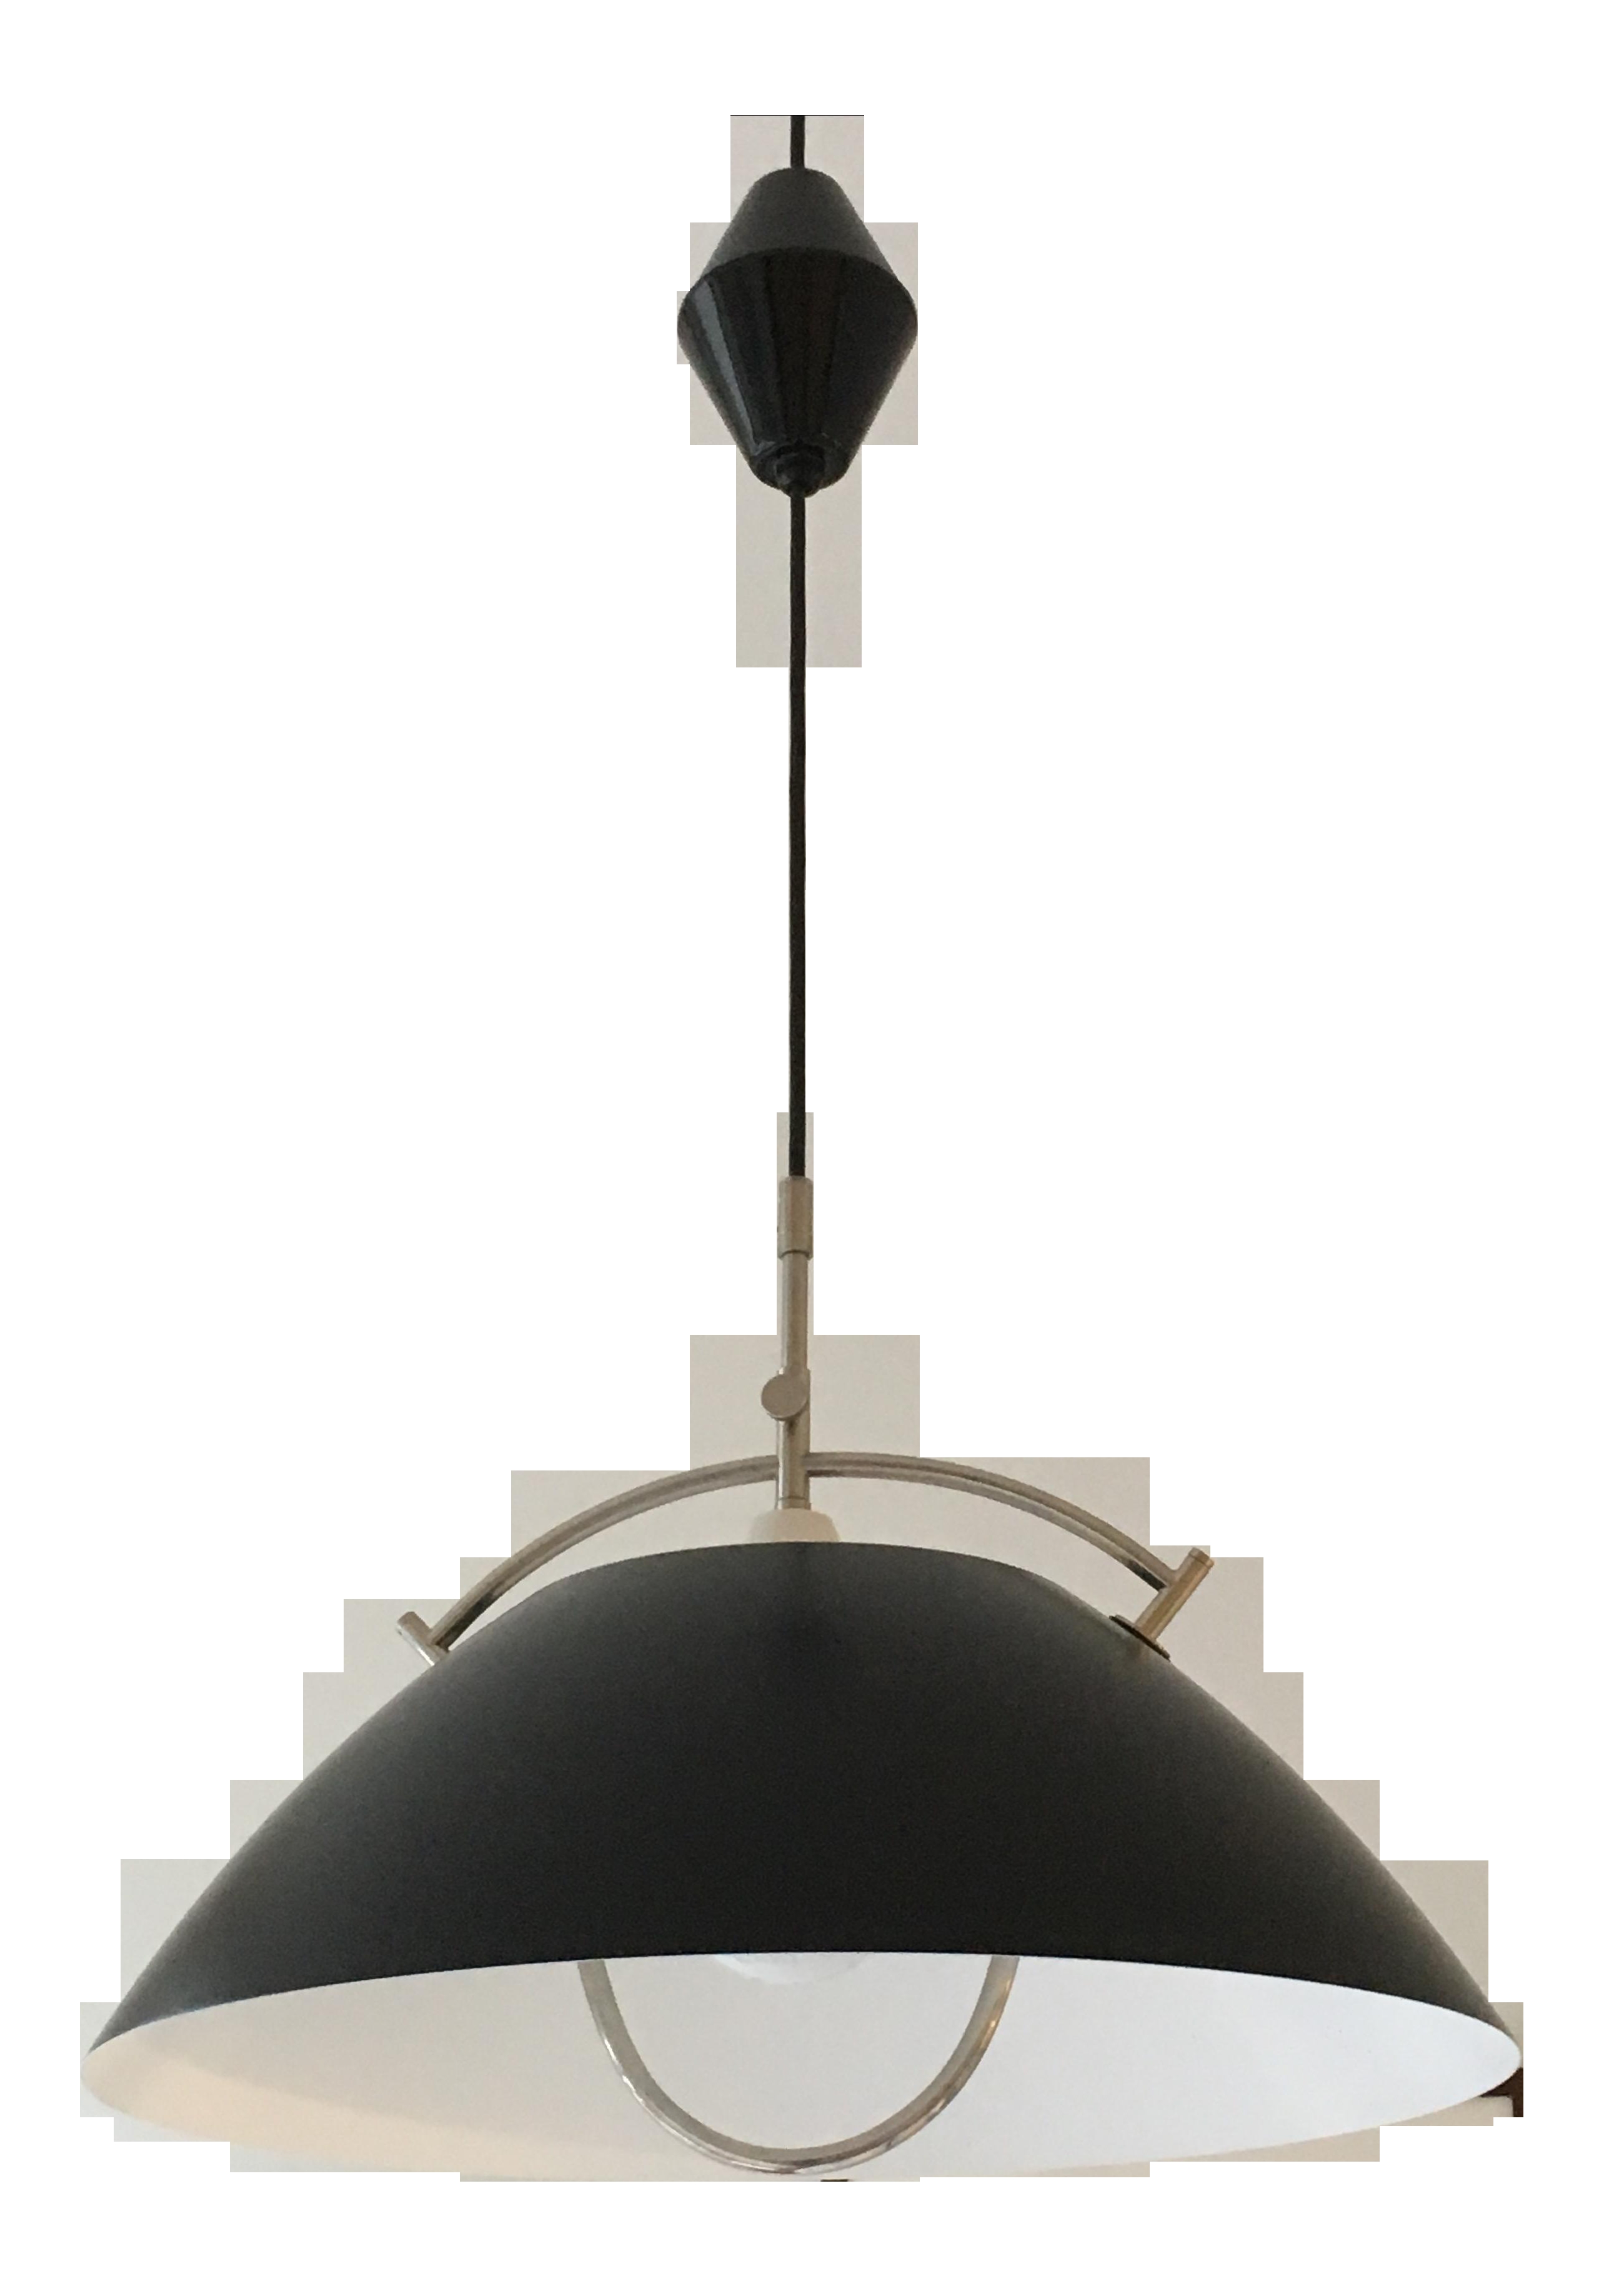 Retractable Ceiling Light Fitting